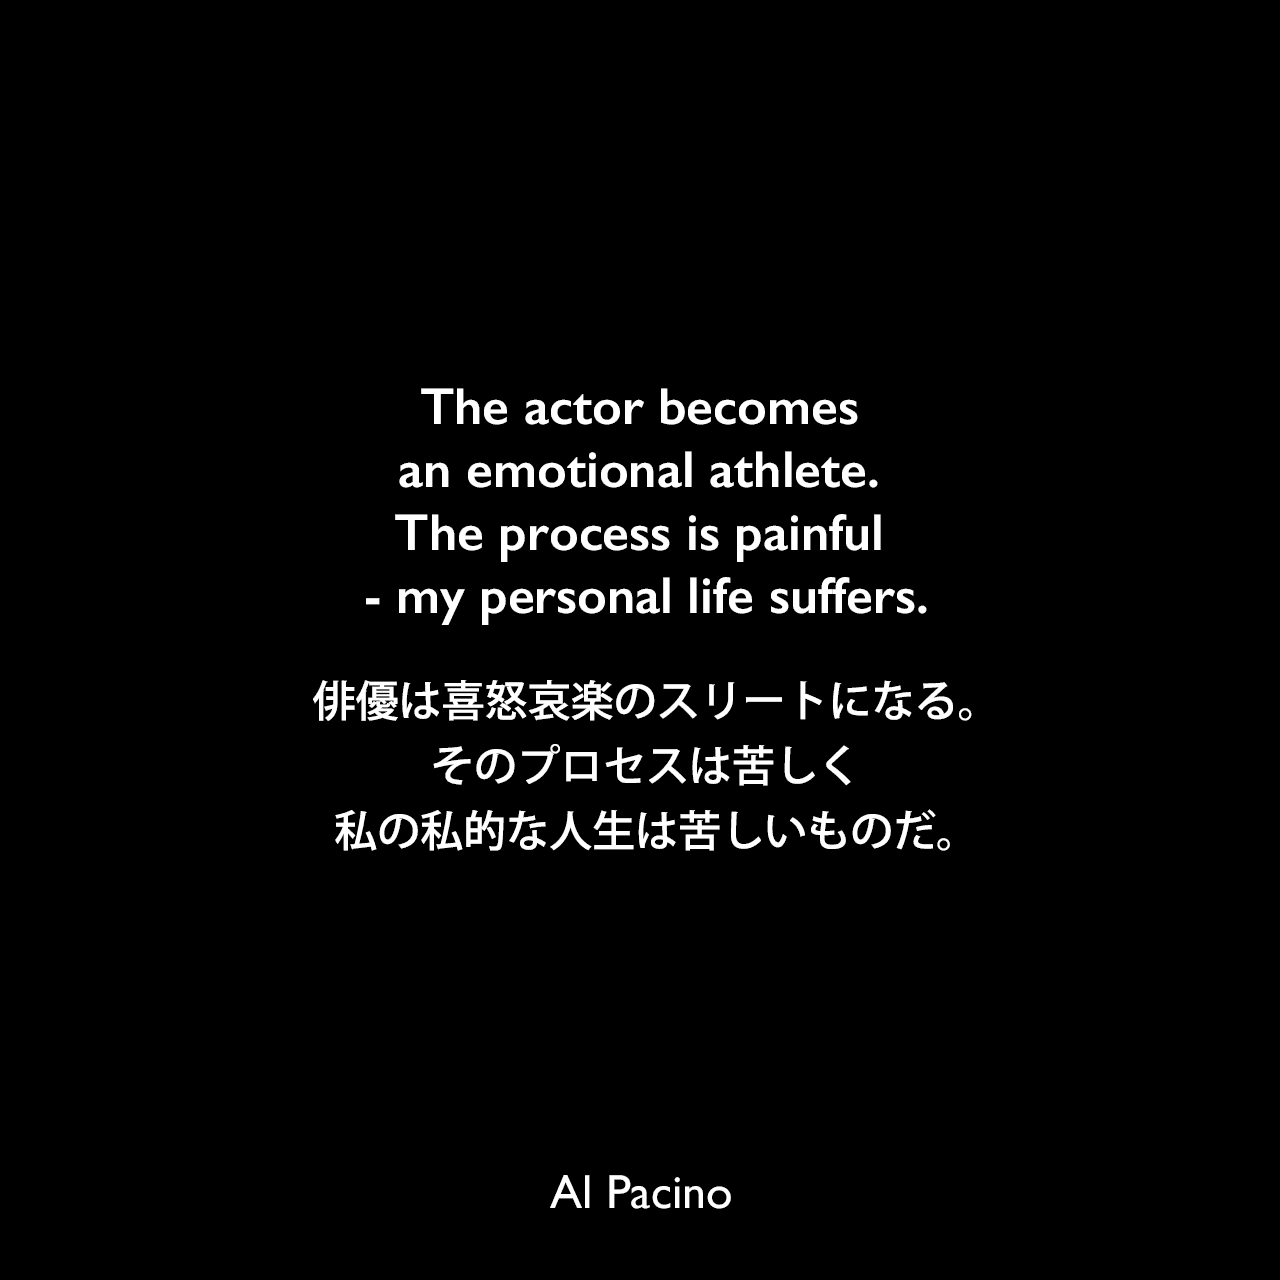 The actor becomes an emotional athlete. The process is painful - my personal life suffers.俳優は喜怒哀楽のスリートになる。そのプロセスは苦しく、私の私的な人生は苦しいものだ。Al Pacino